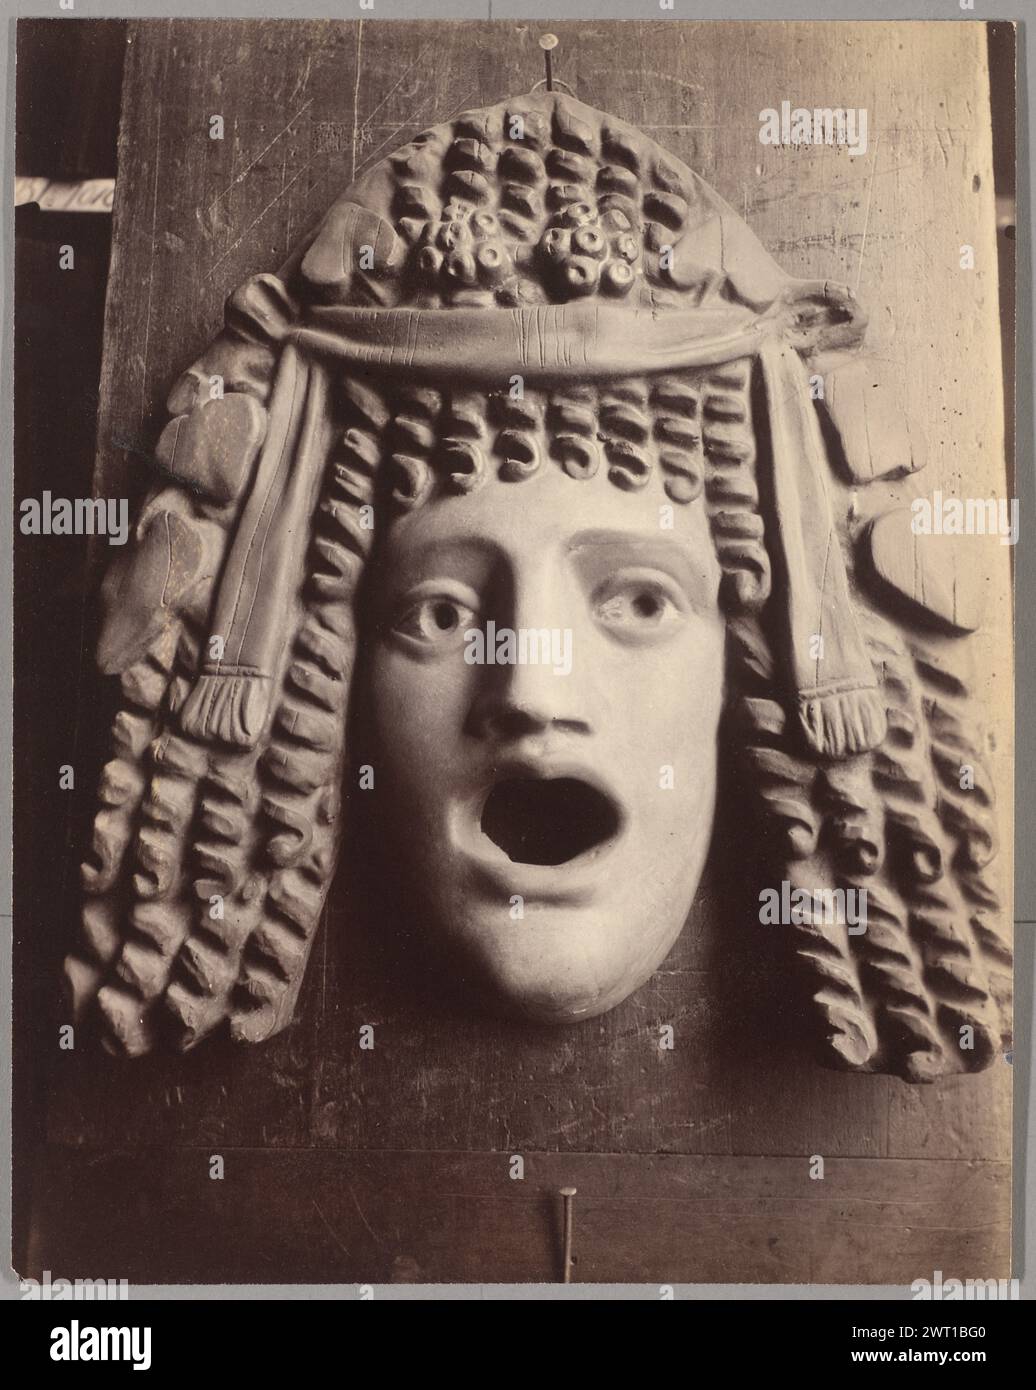 Masque antique. Eugène Atget, photographer (French, 1857 - 1927) 1923 View of a mask hanging on a nail affixed to wood. The mask's mouth is open and its eyes are wide. The mask has ringlets and is wearing a headpiece. (Verso, print) upper center, in pencil in the artist's hand: 'Masque antique'; (Verso, print) upper right, in pencil: '[illeg.] 1)' (Verso, print) upper right, in pencil in the artist's hand: '54'; (Verso, print) center, in pencil: 'S.S.'; (Verso, print) center right, in pencil in the artist's hand: '17 bis' ['bis' underlined]; (Verso, print) lower center, in pencil: 'B.A.'; (Ver Stock Photo